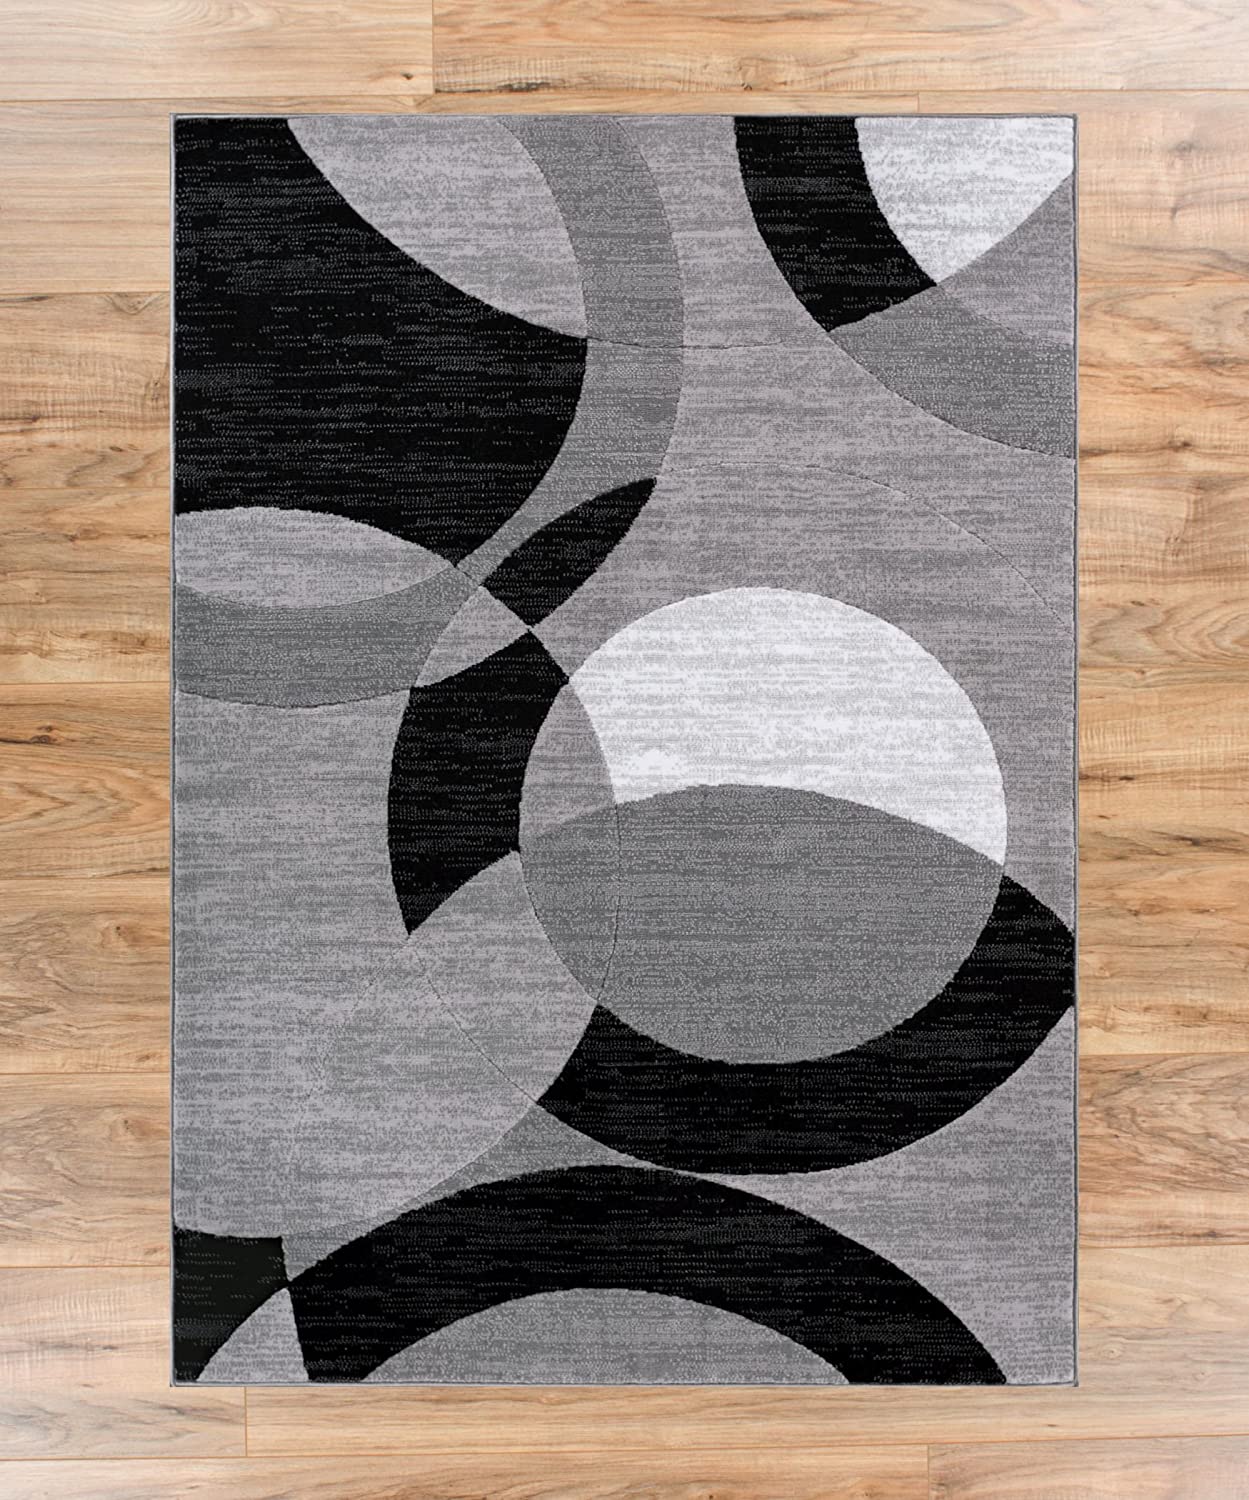 Jackpot Grey Geometric Modern Casual Abstract Boxes Lines Circles Area Rug Plush Shed